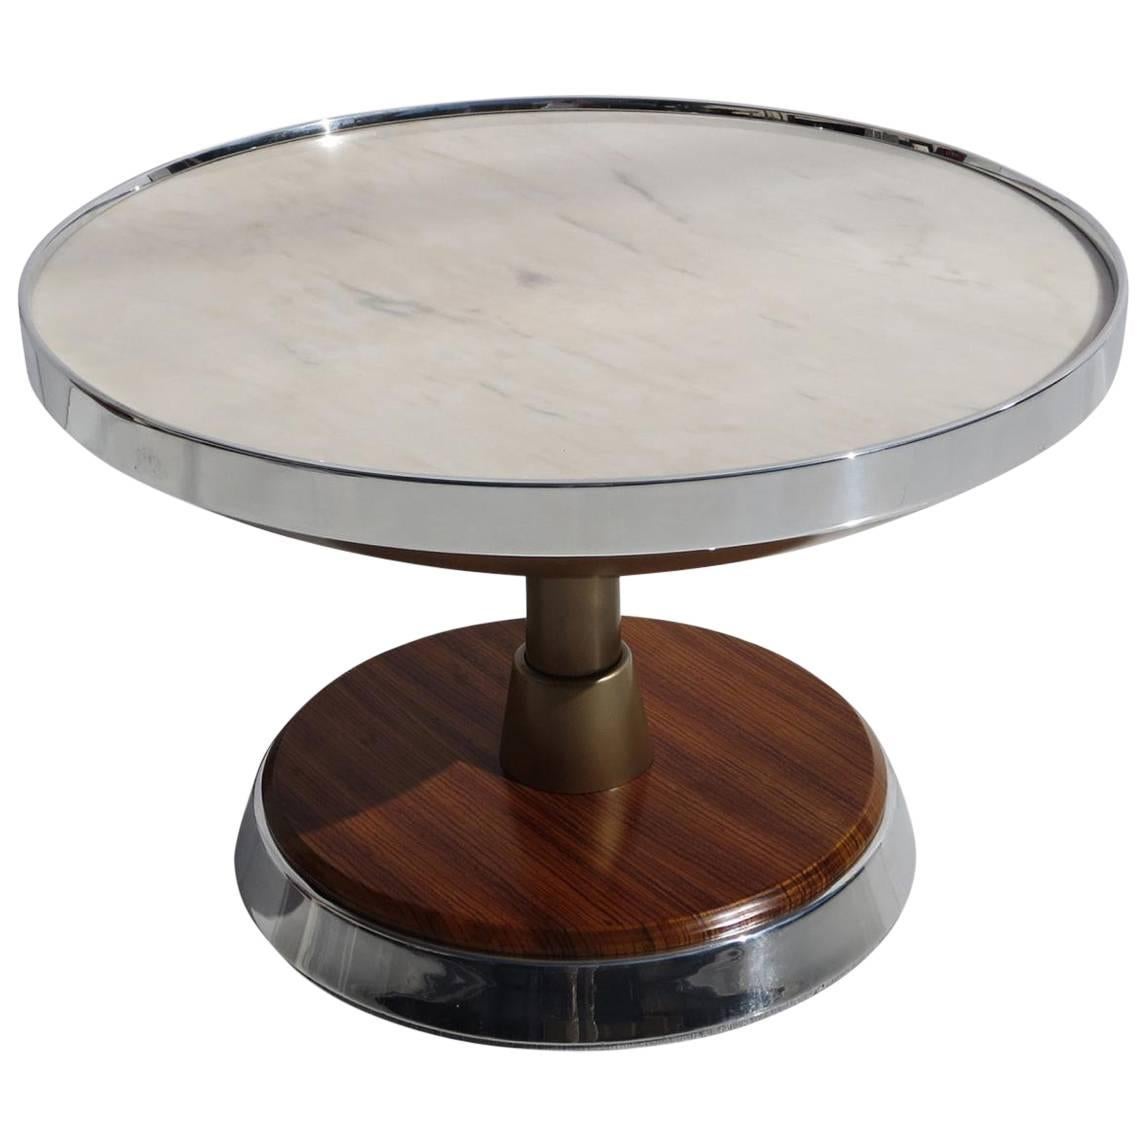 Illuminated Side Table by Nino Zoncada for SS Stella Solaris Cruise Ship For Sale